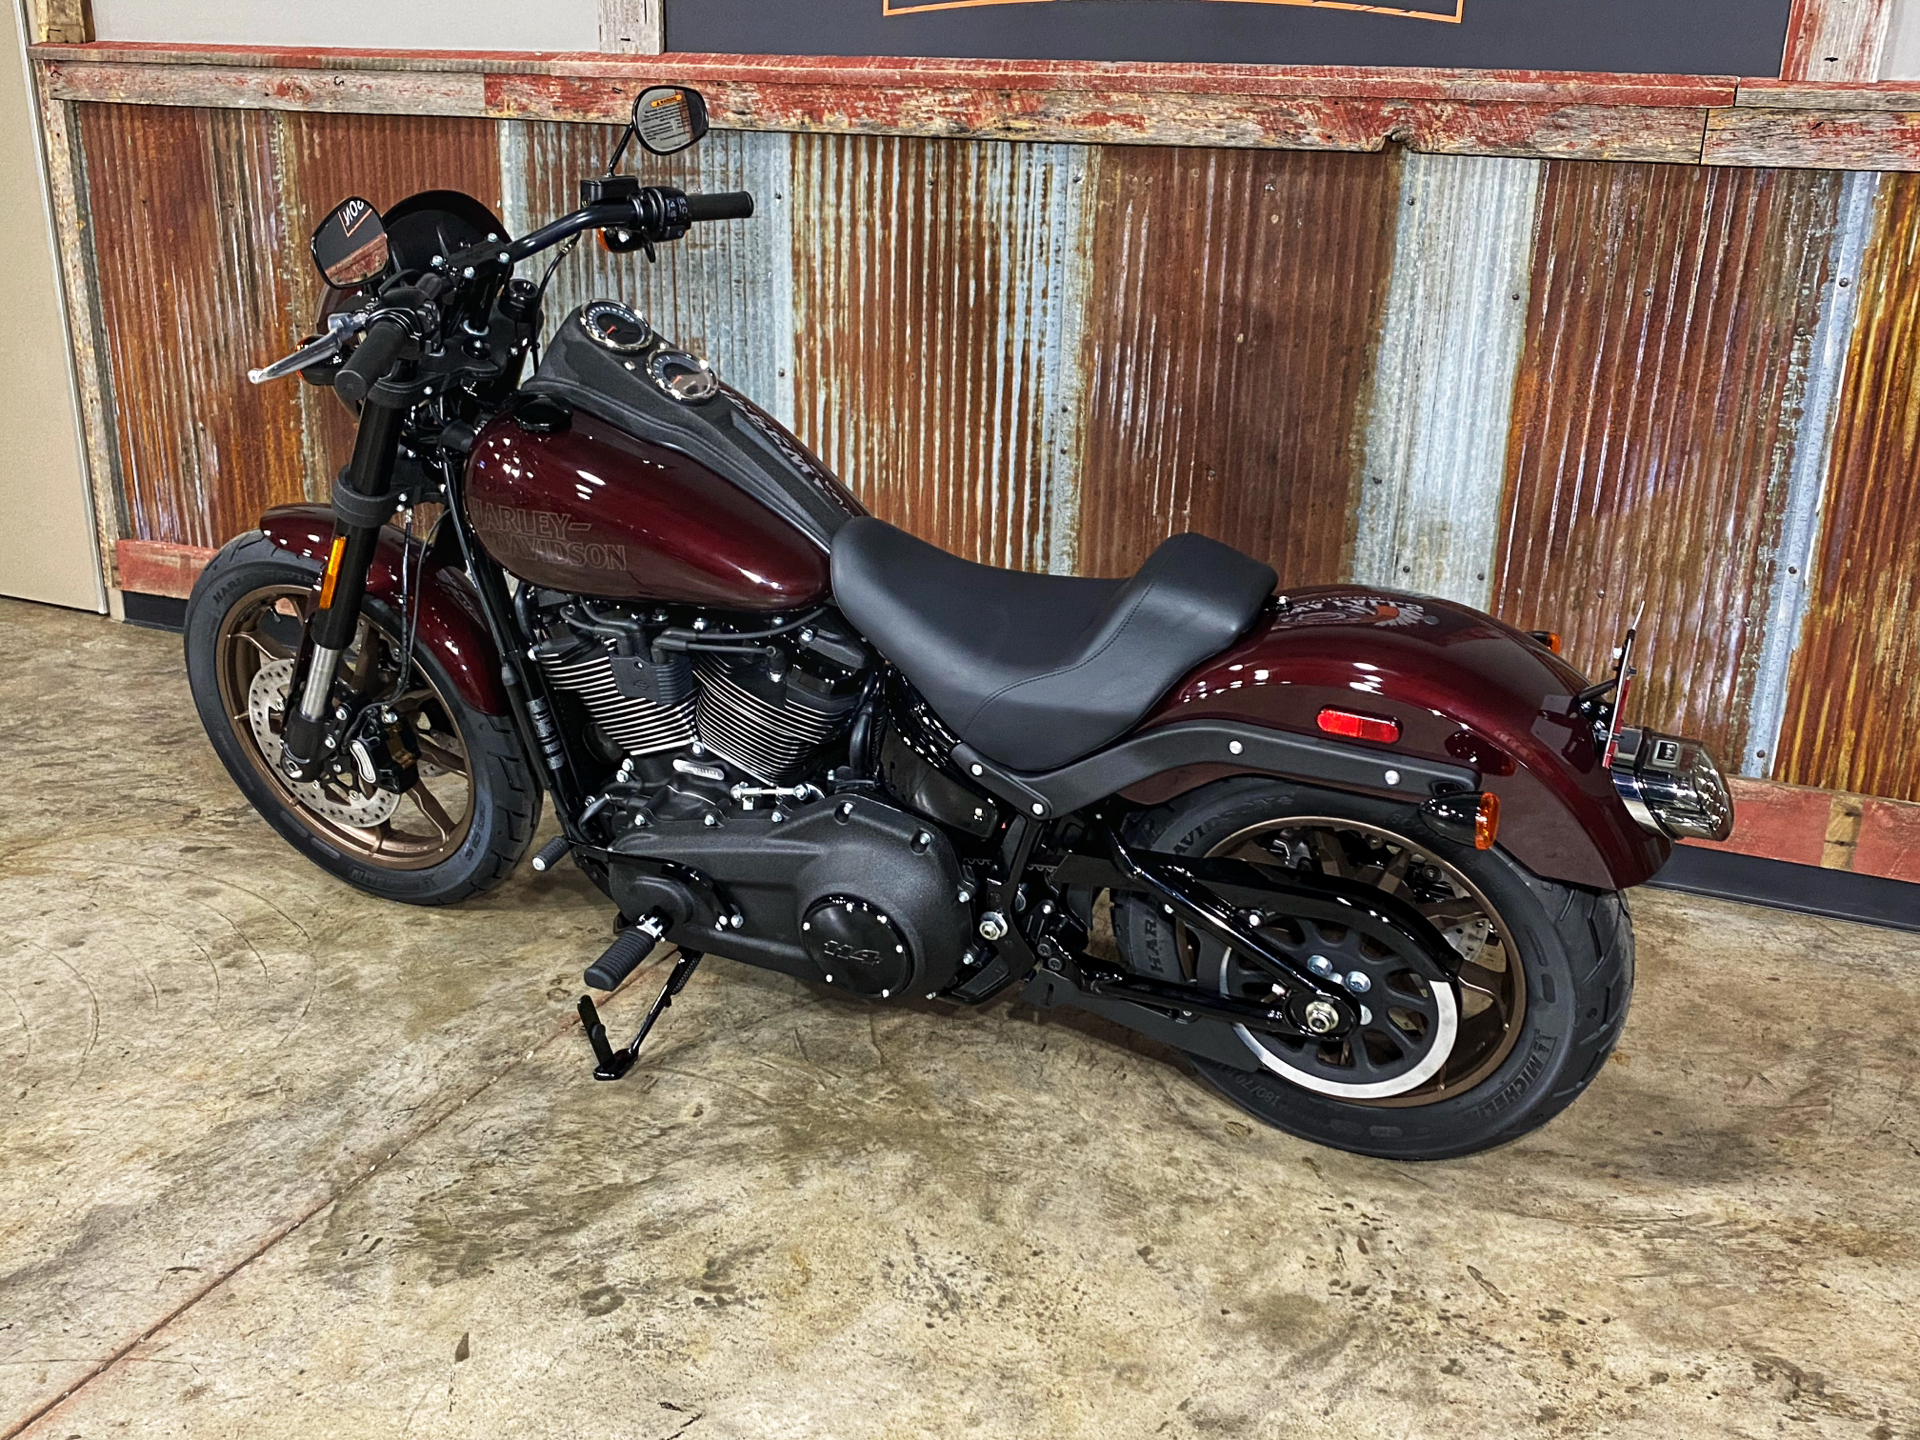 New 2021 Harley Davidson Low Rider S Midnight Crimson Motorcycles In Chippewa Falls Wi Fx021165